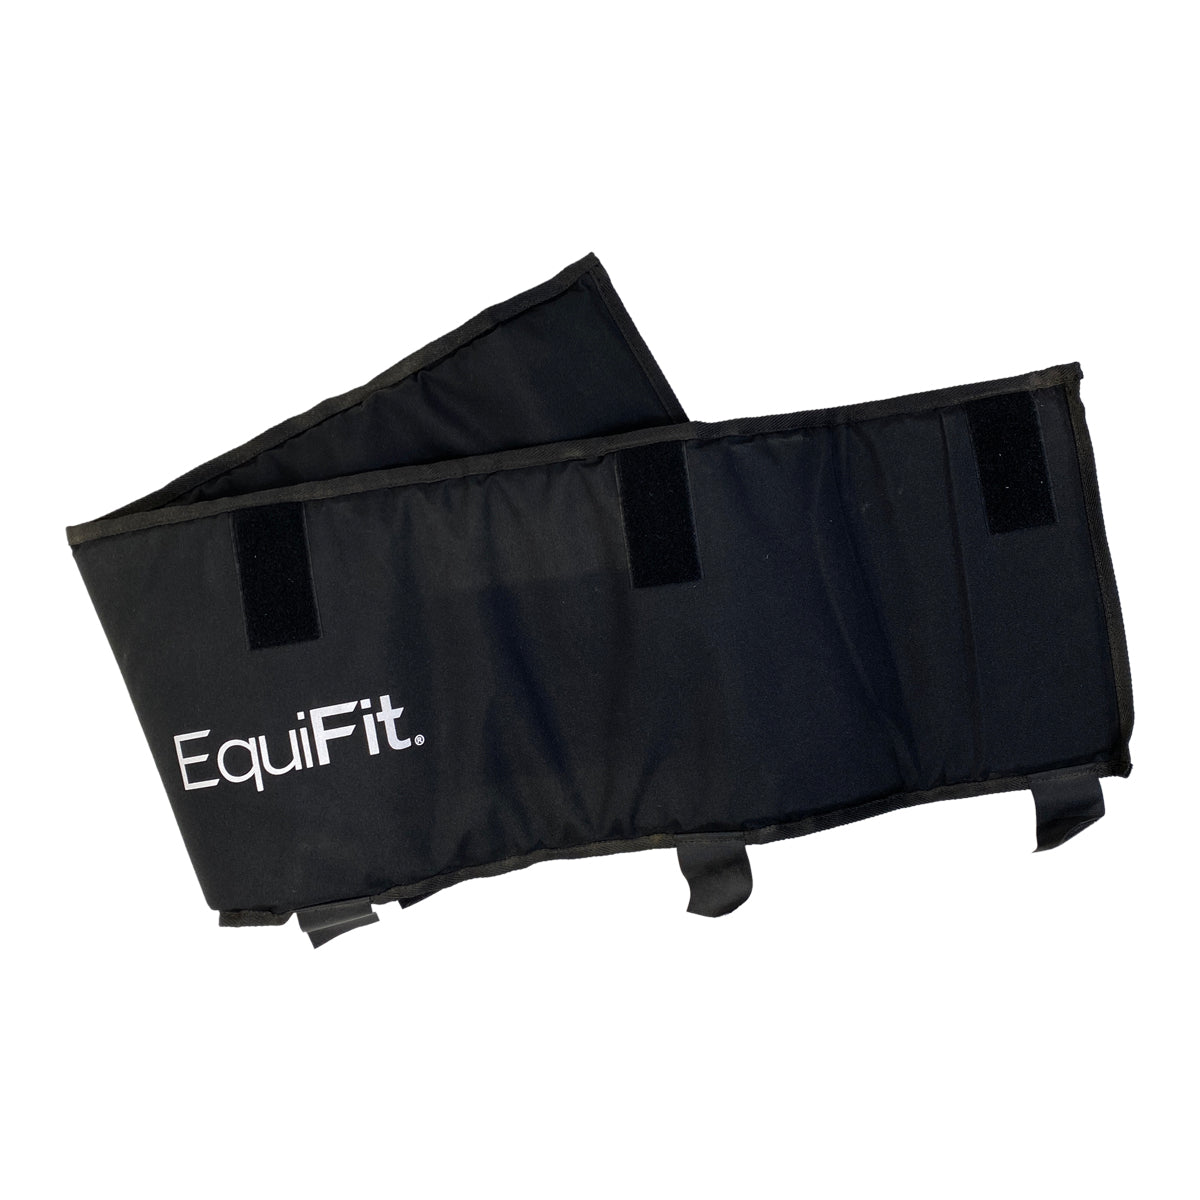 EquiFit Stall Bumper in Black